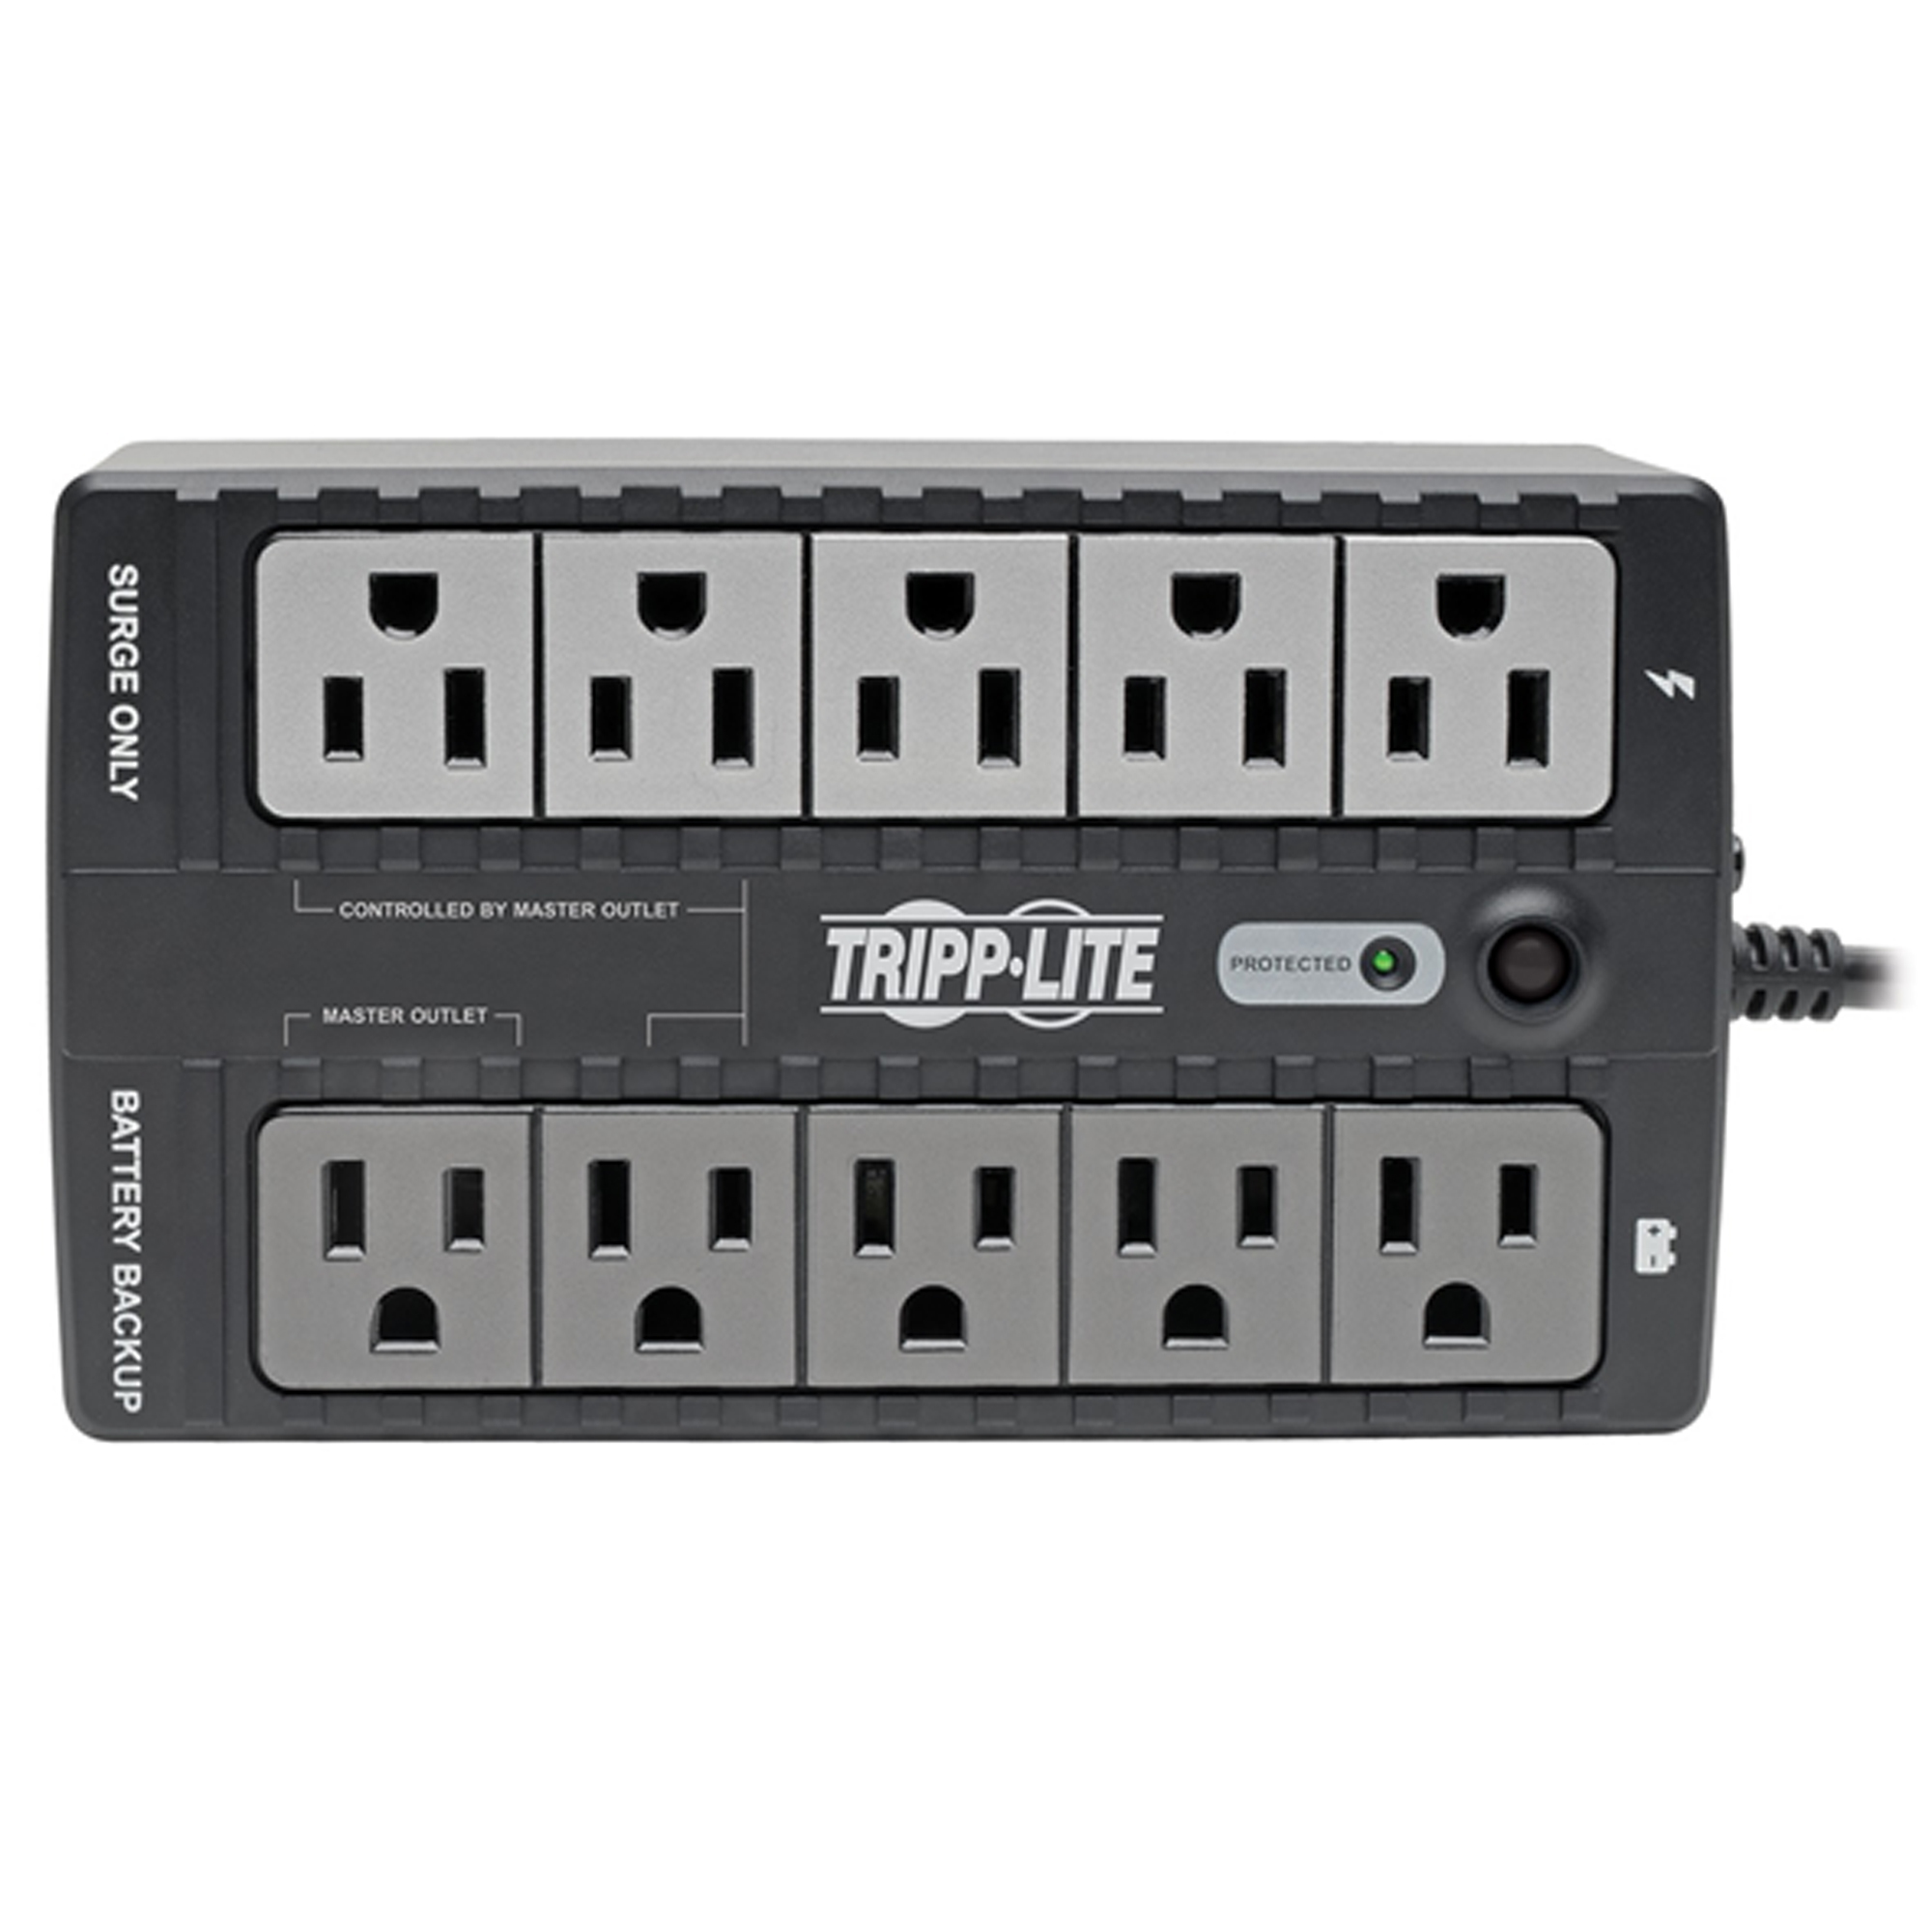 Tripp Lite by Eaton ECO Series, 10-Outlet Energy-Saving Standby UPS System, Volts 550 Running Watts 300 W, Model ECO550UPS